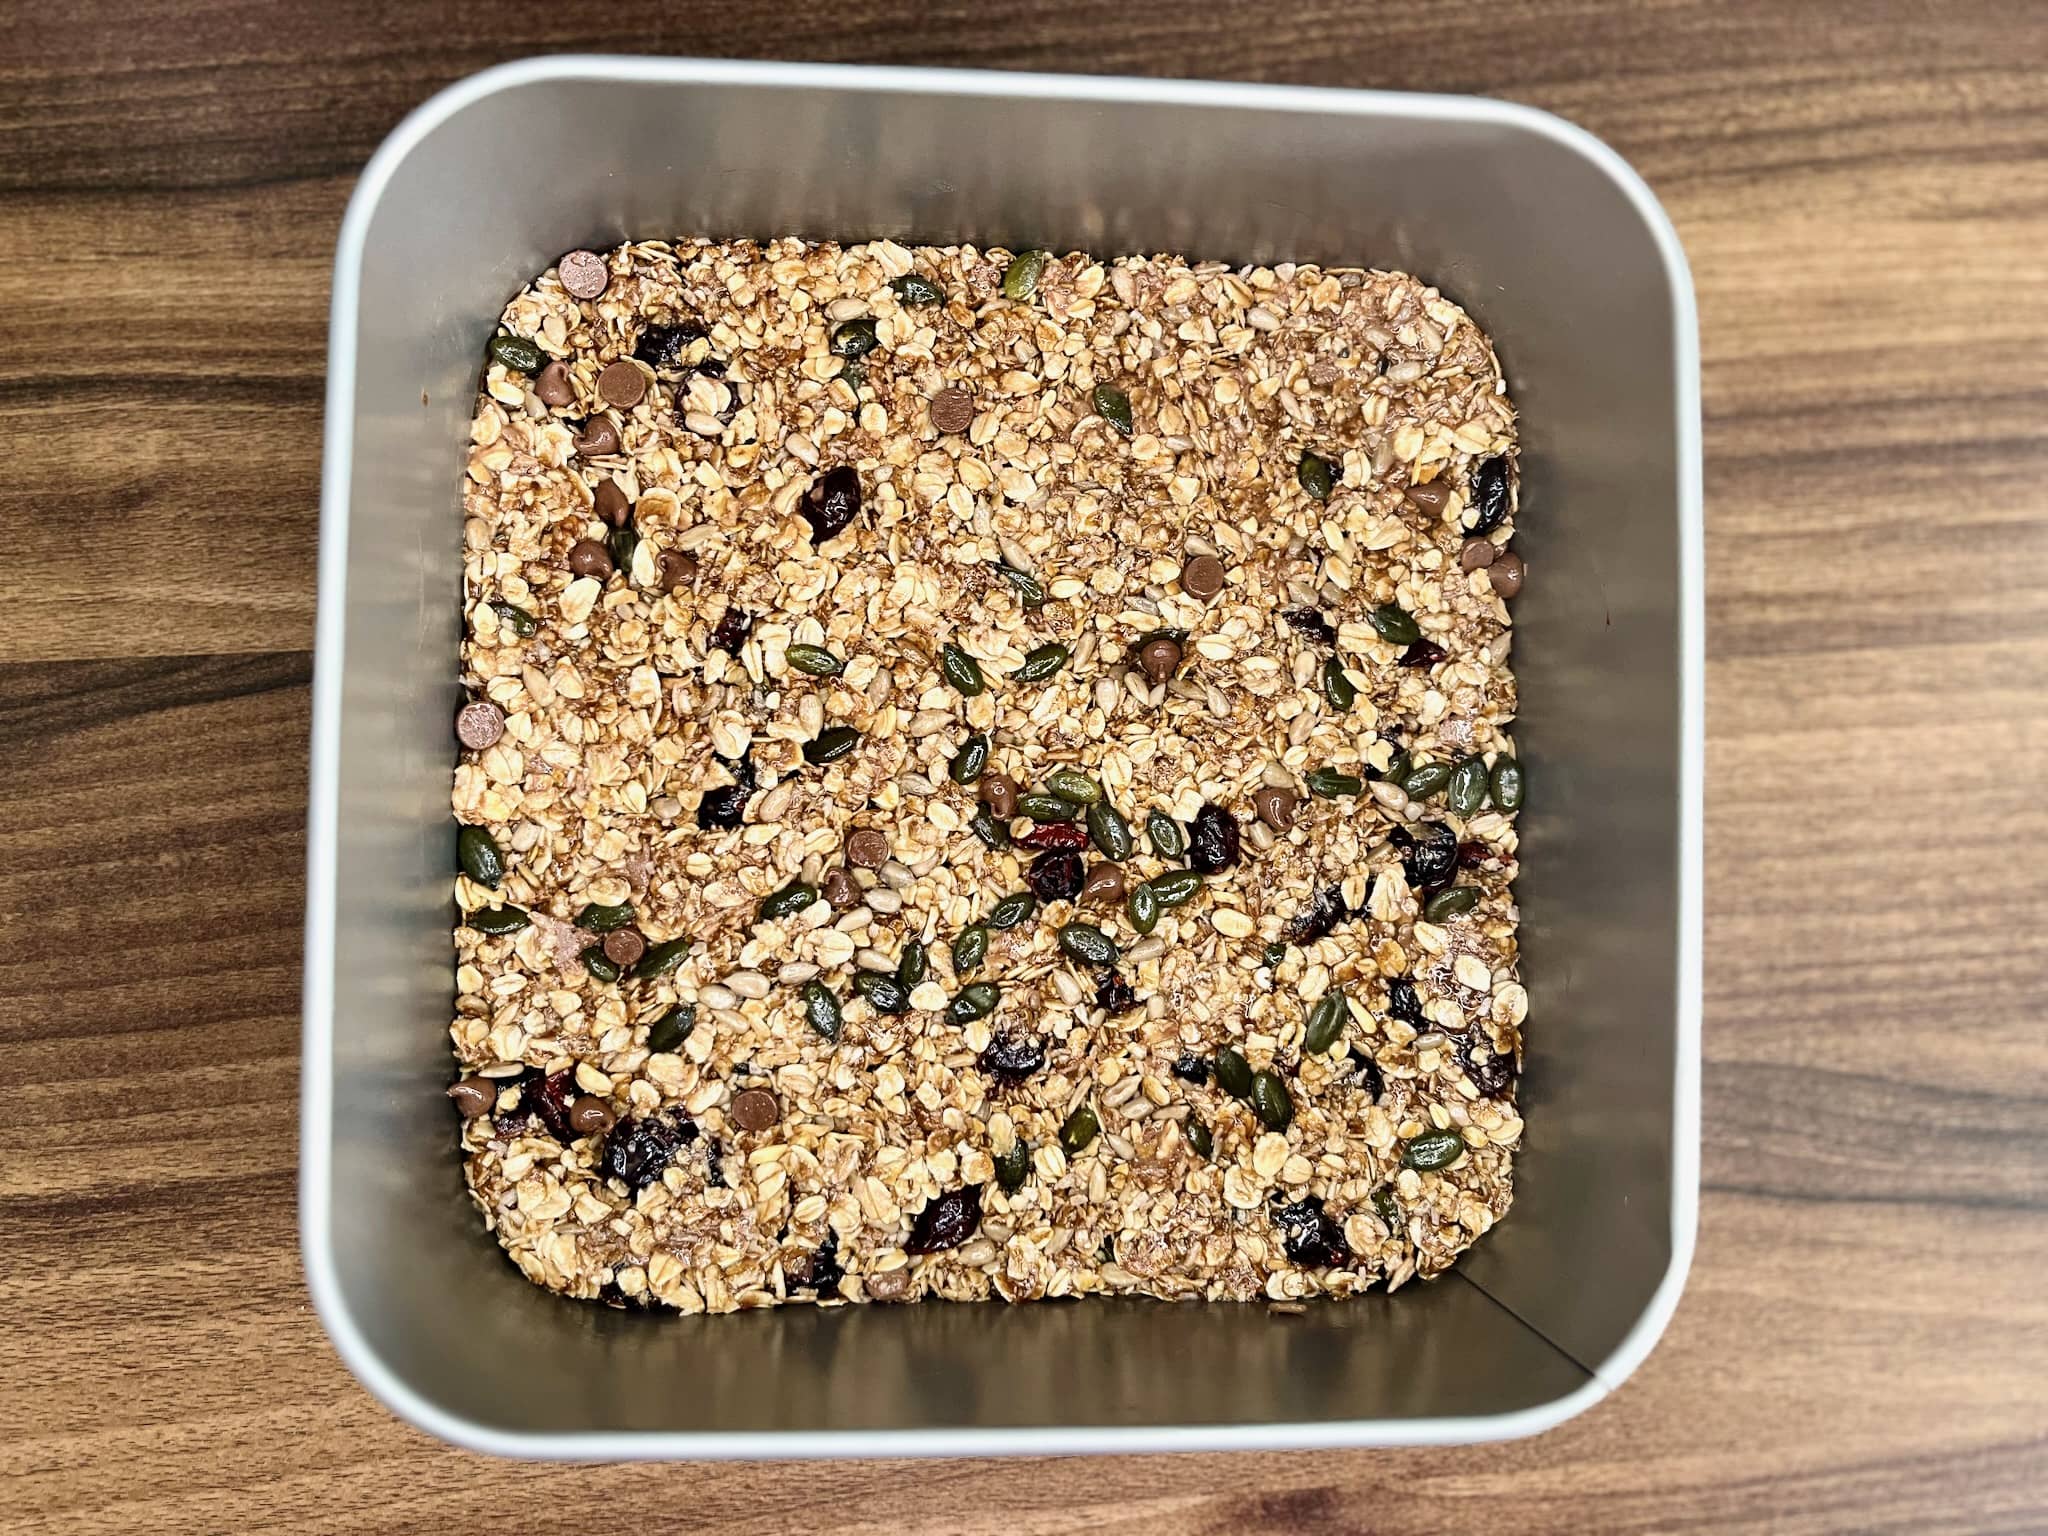 The muesli bar mixture is pressed into a tray